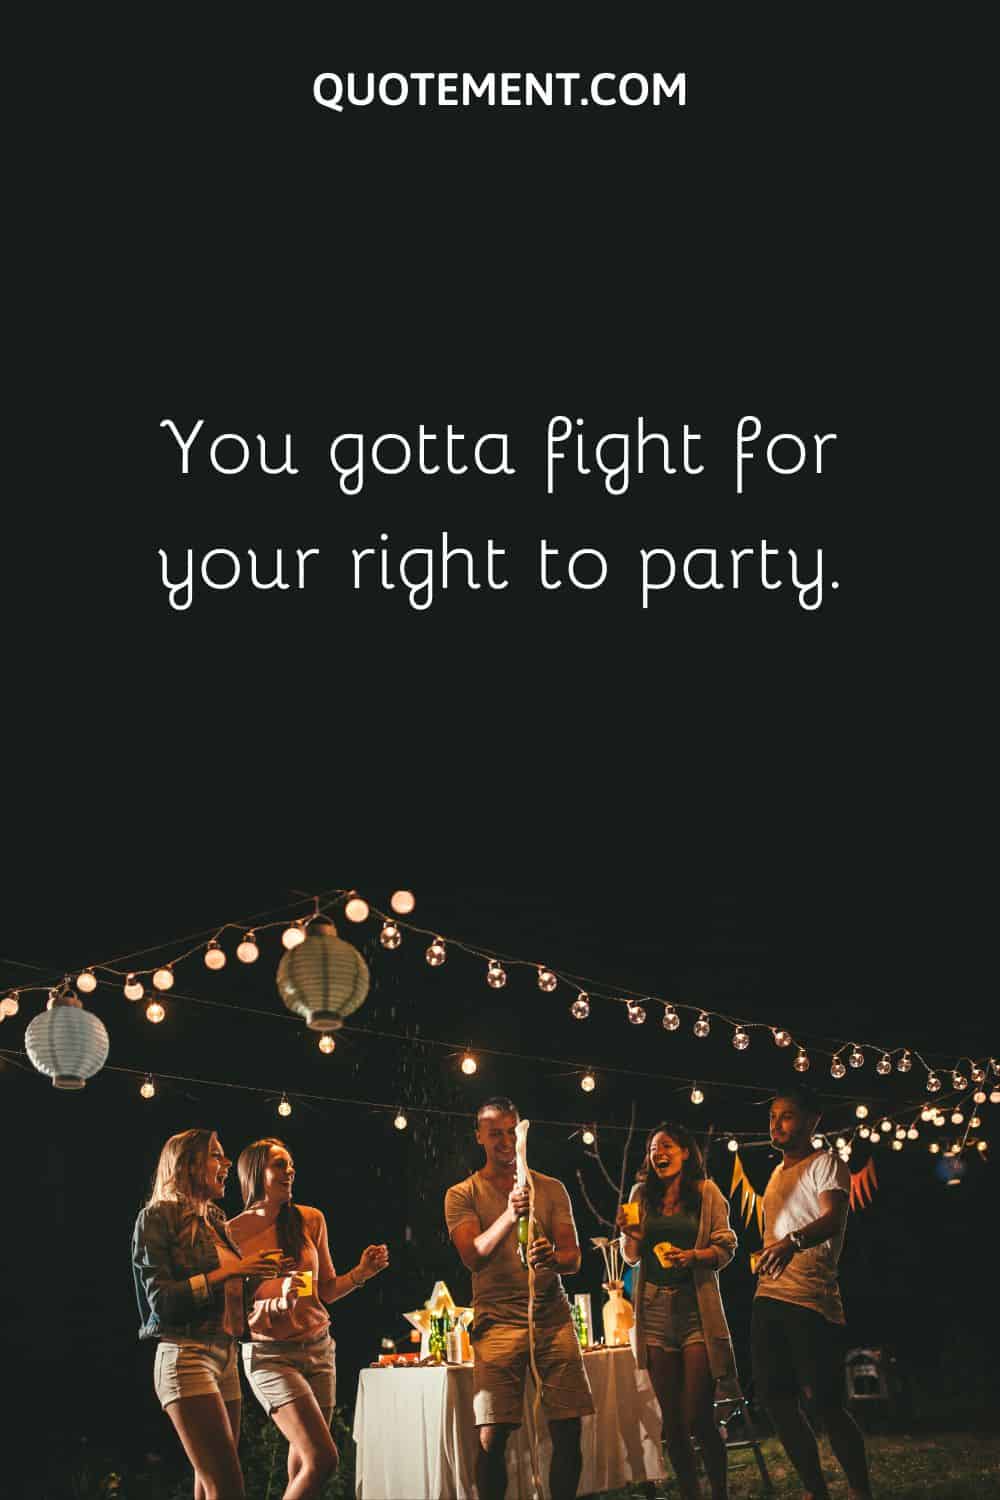 You gotta fight for your right to party